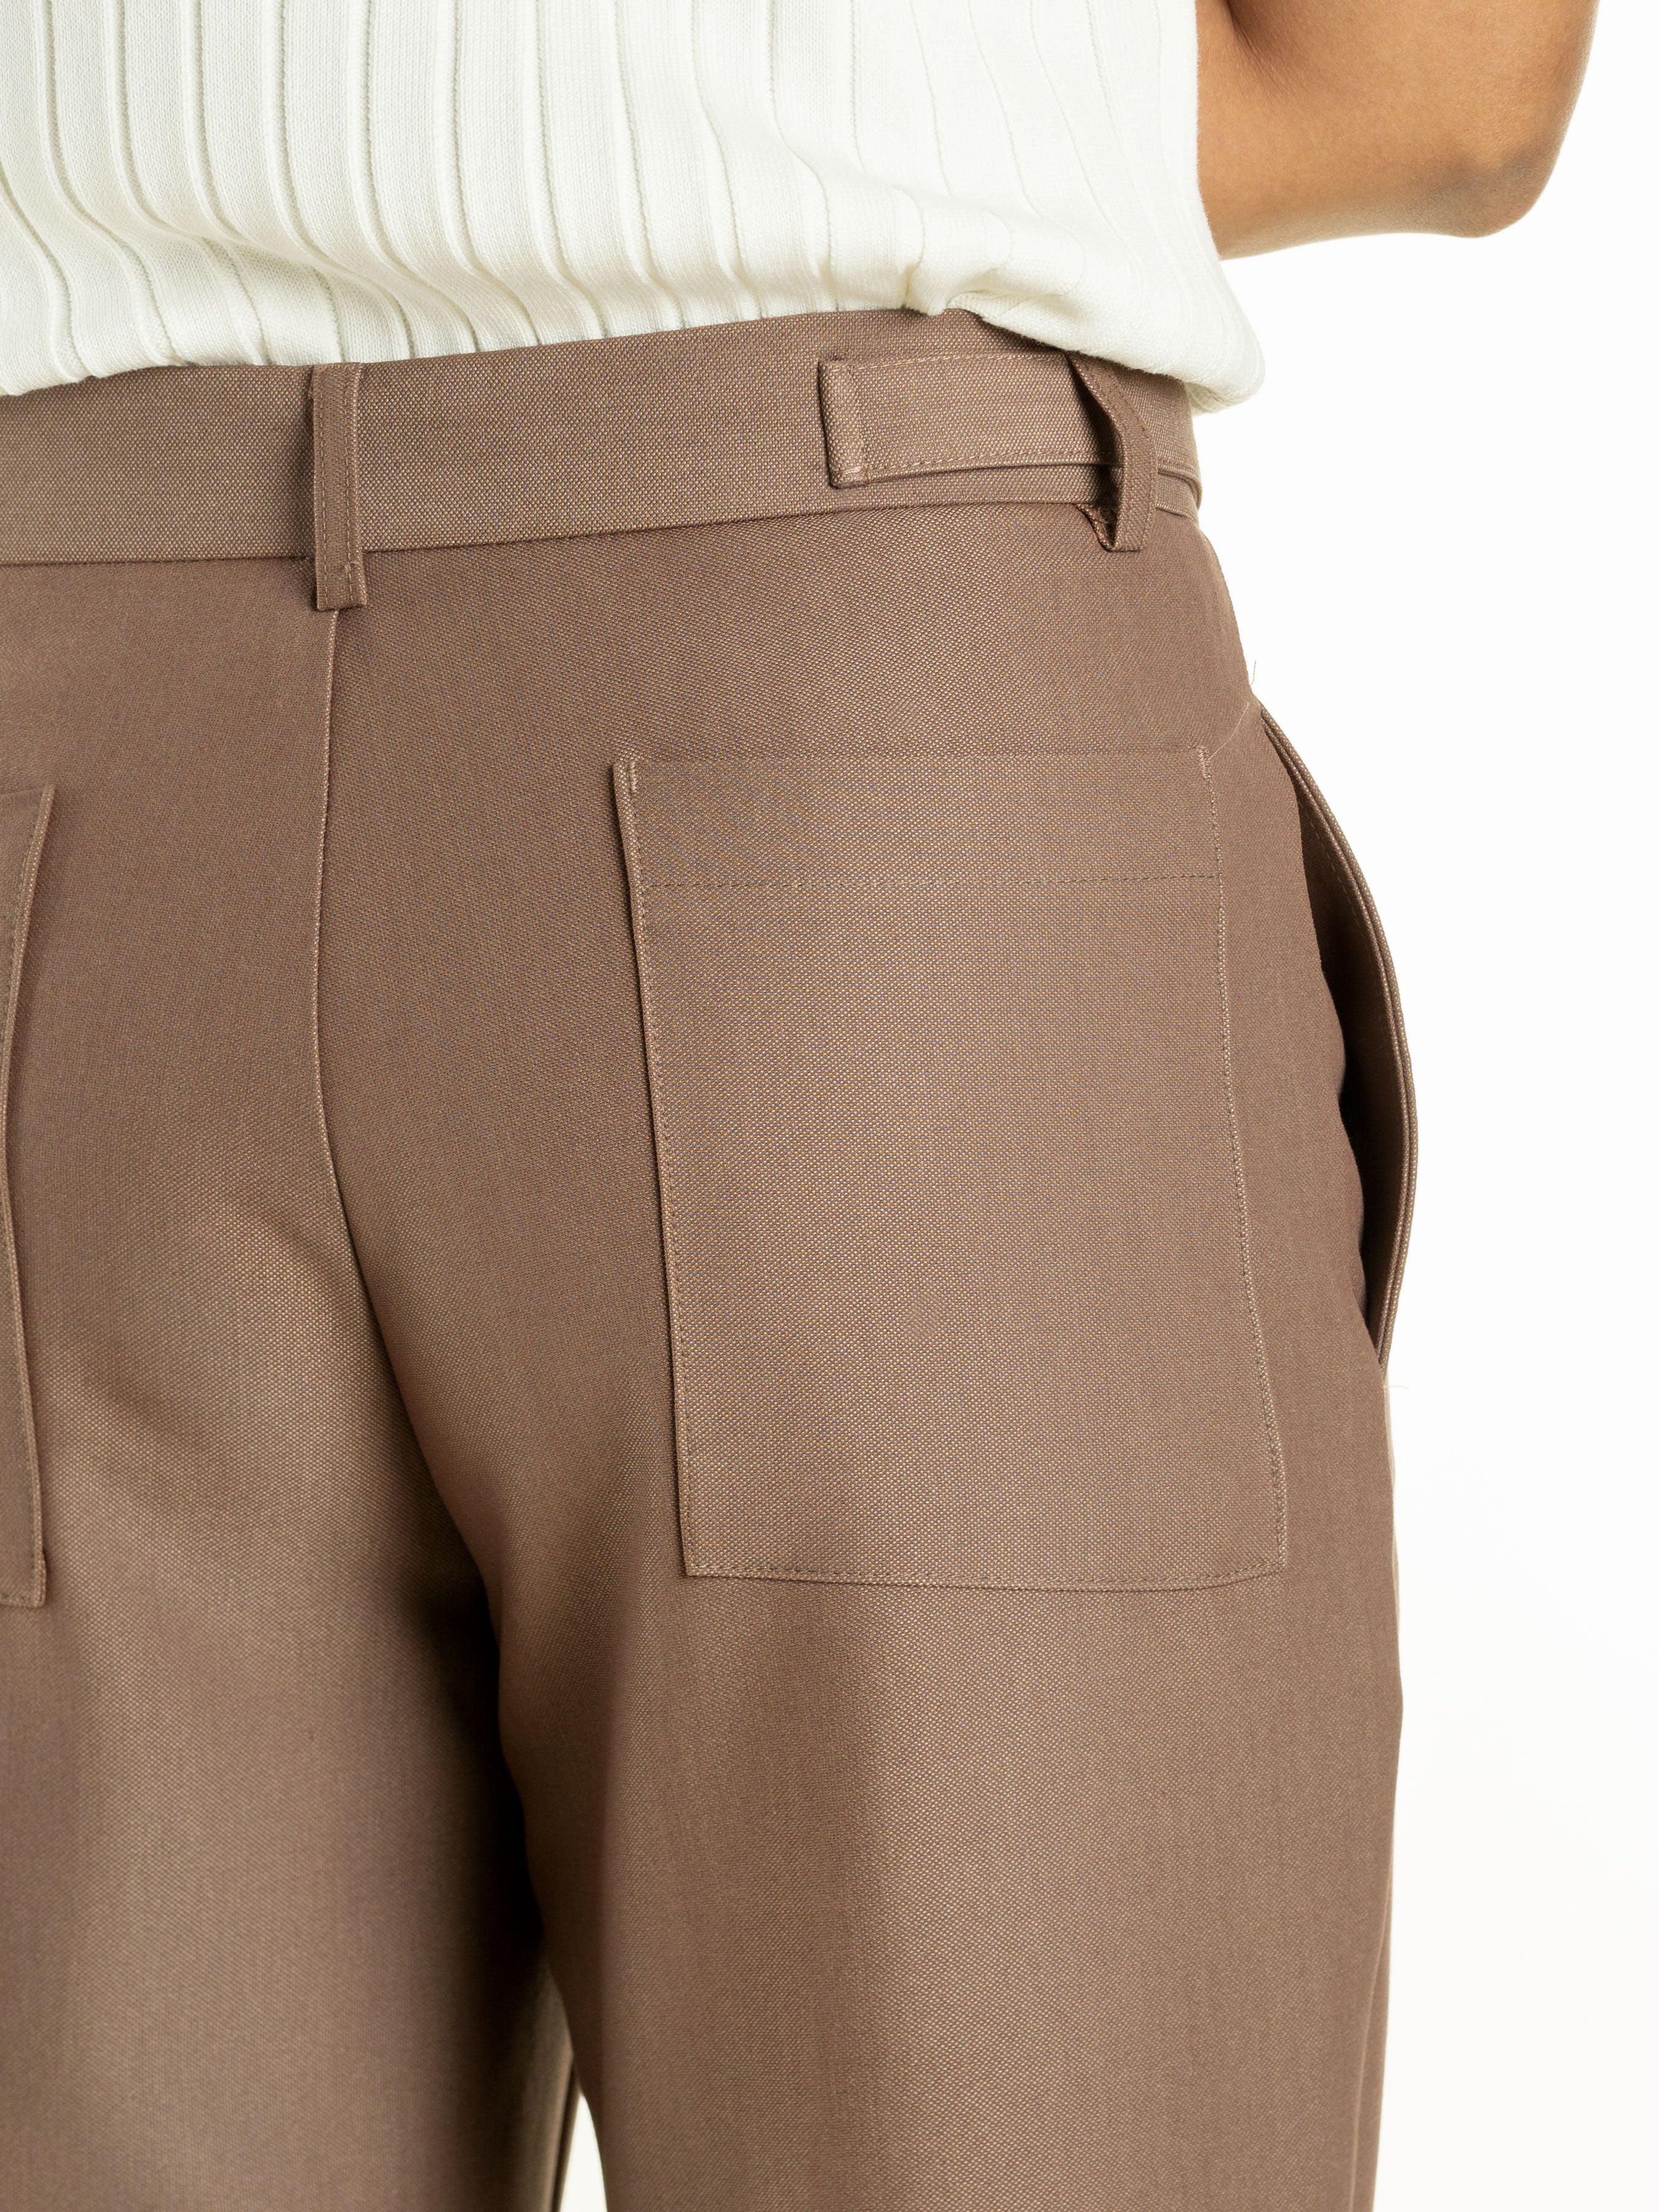 Trousers Belt Loop With Side Adjusters - Cocoa (Straight Cut) - Zeve Shoes